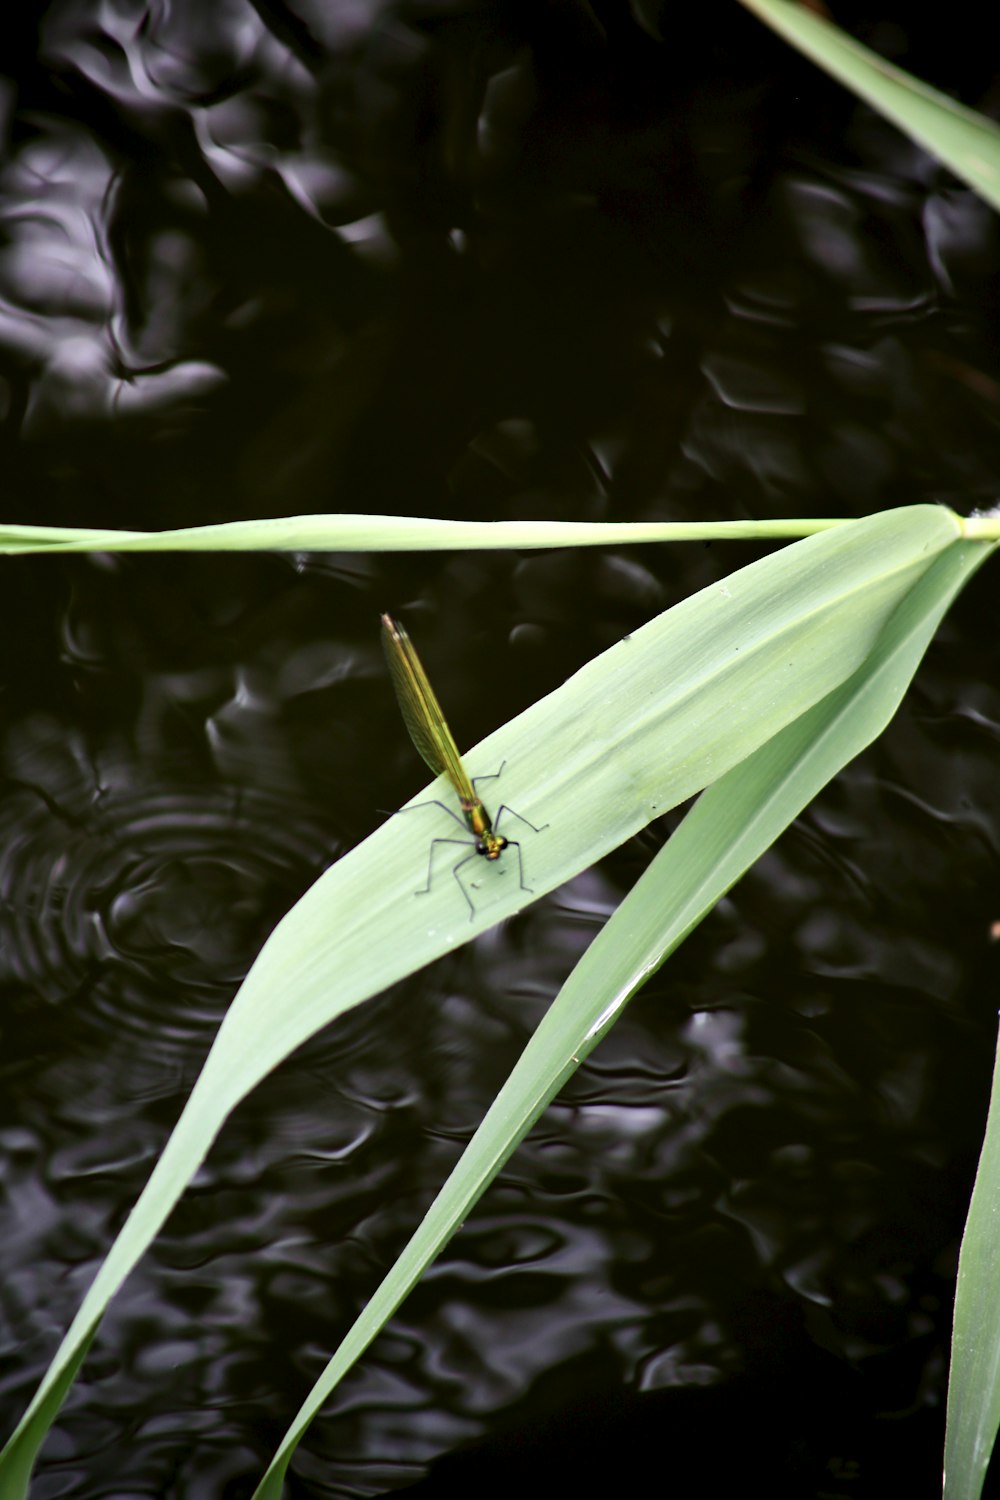 a bug sitting on top of a leaf in the water